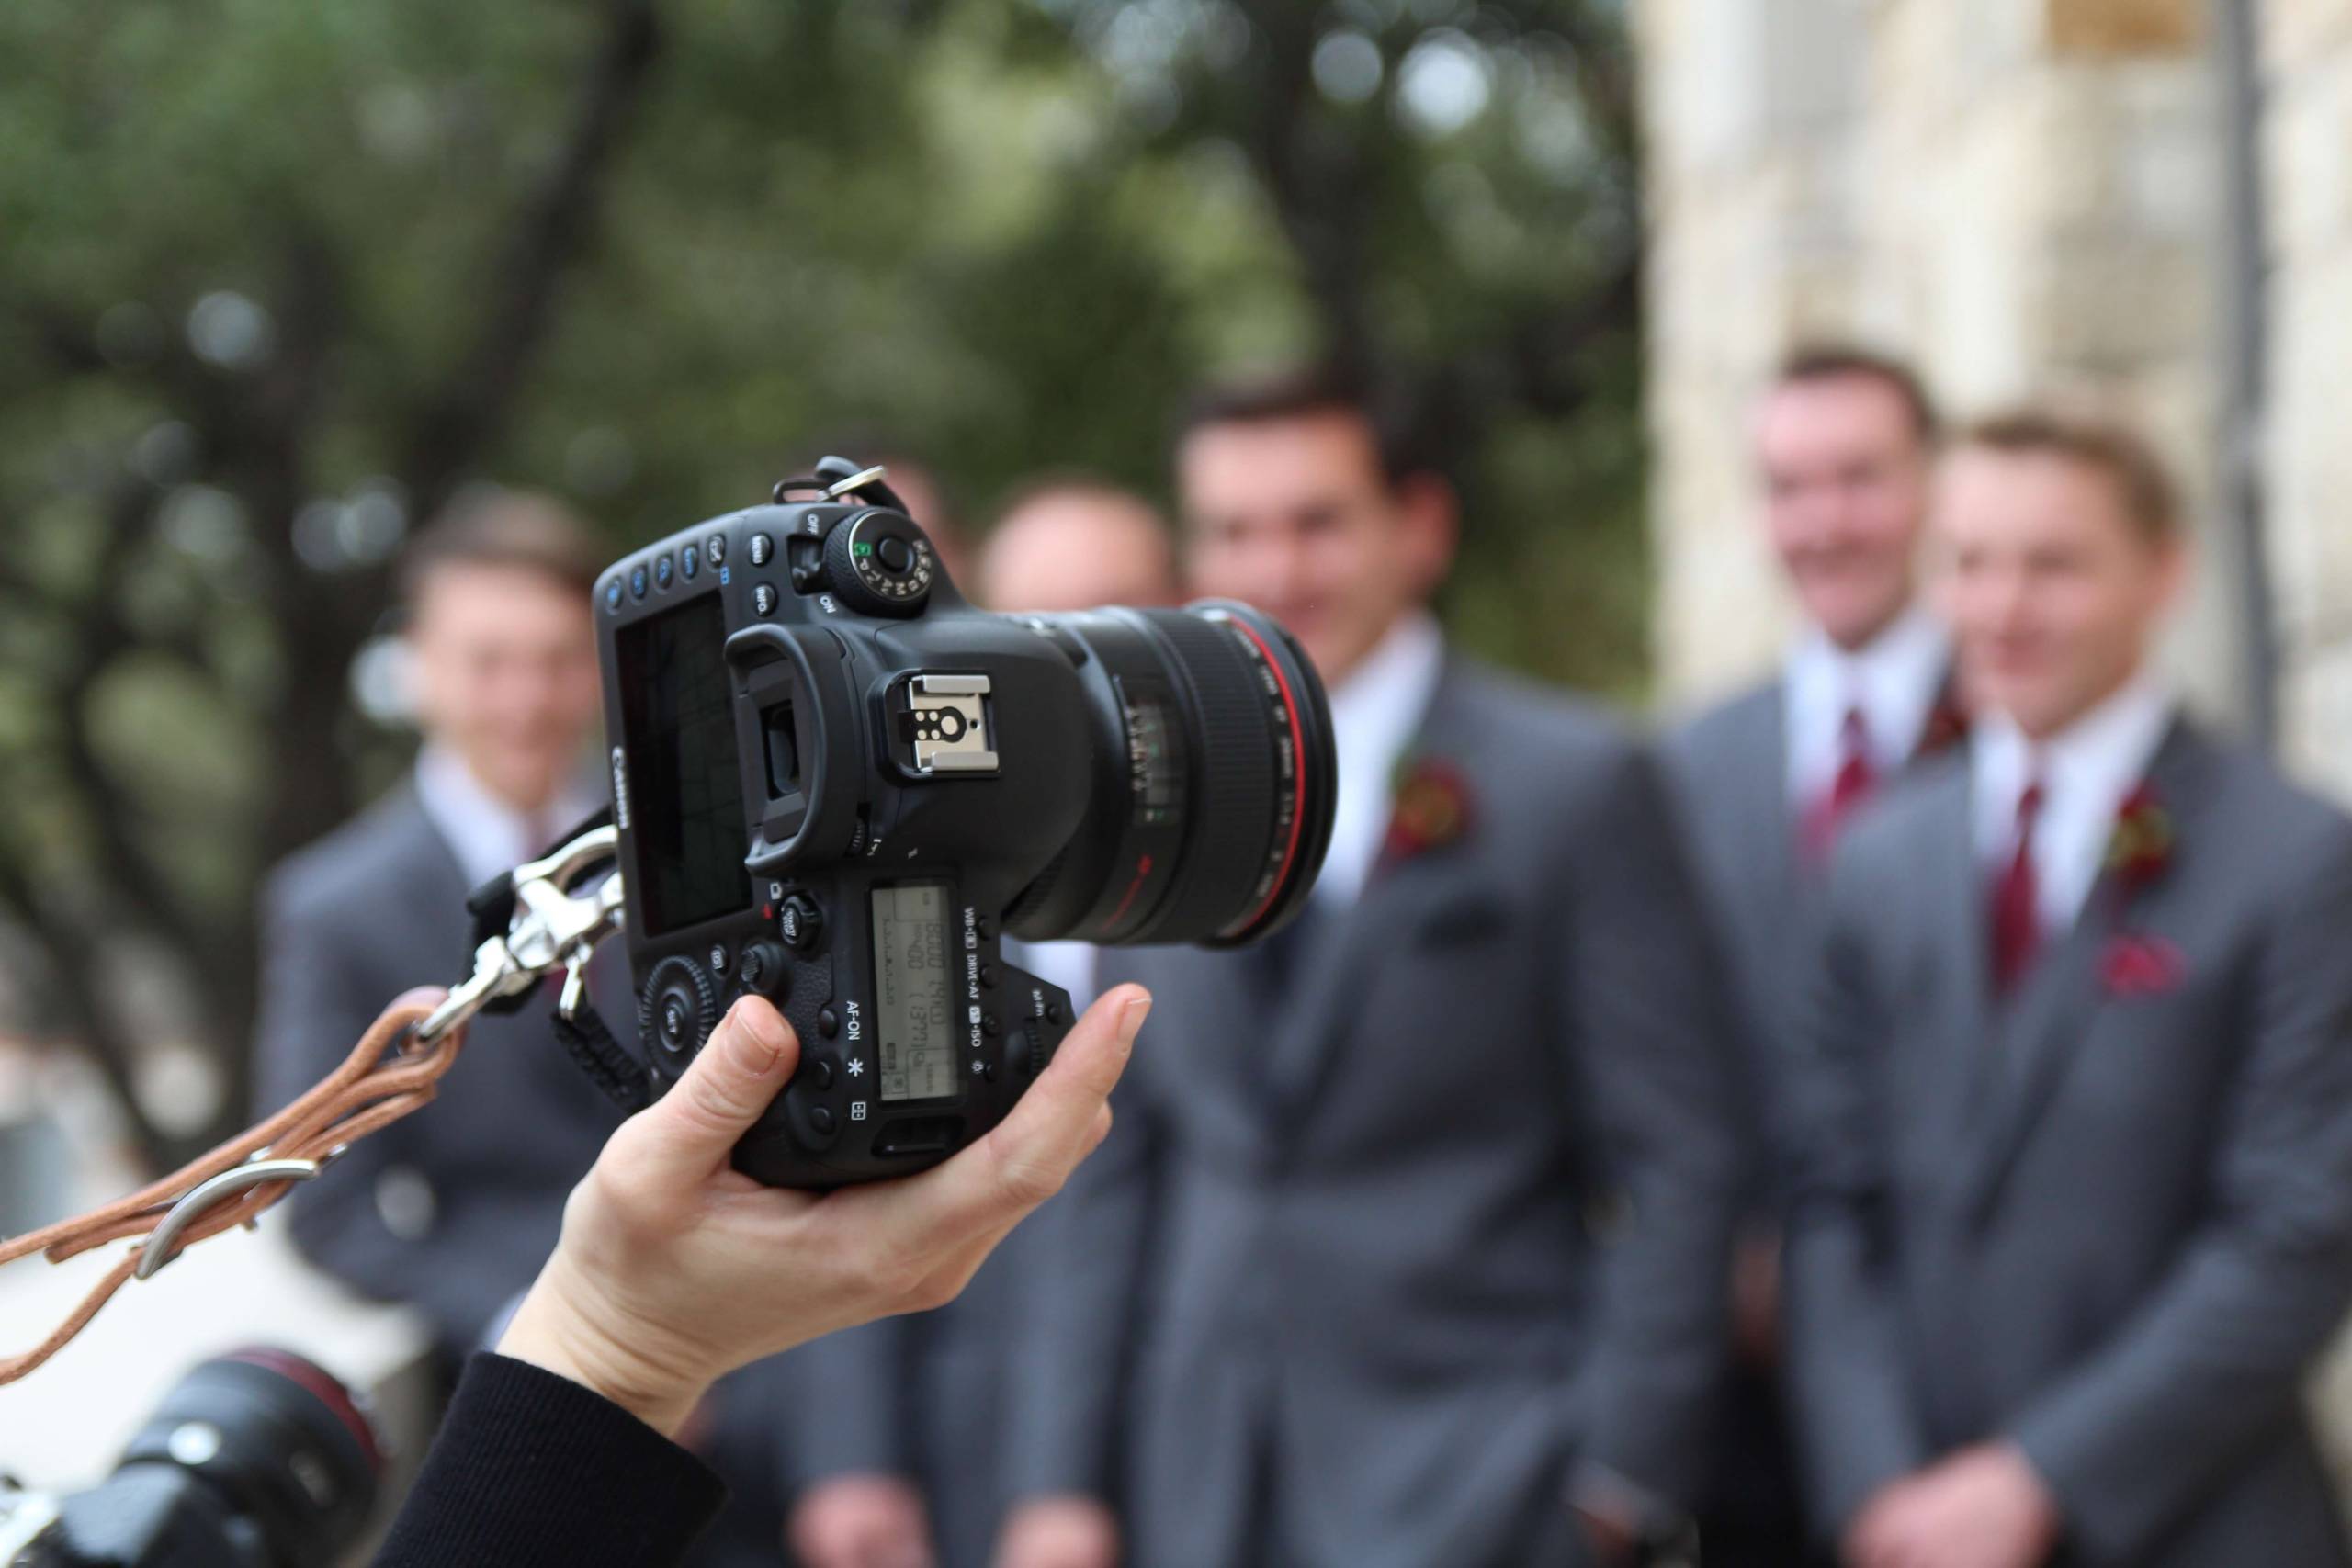 wedding photography advertisements can skyrocket your growth this year